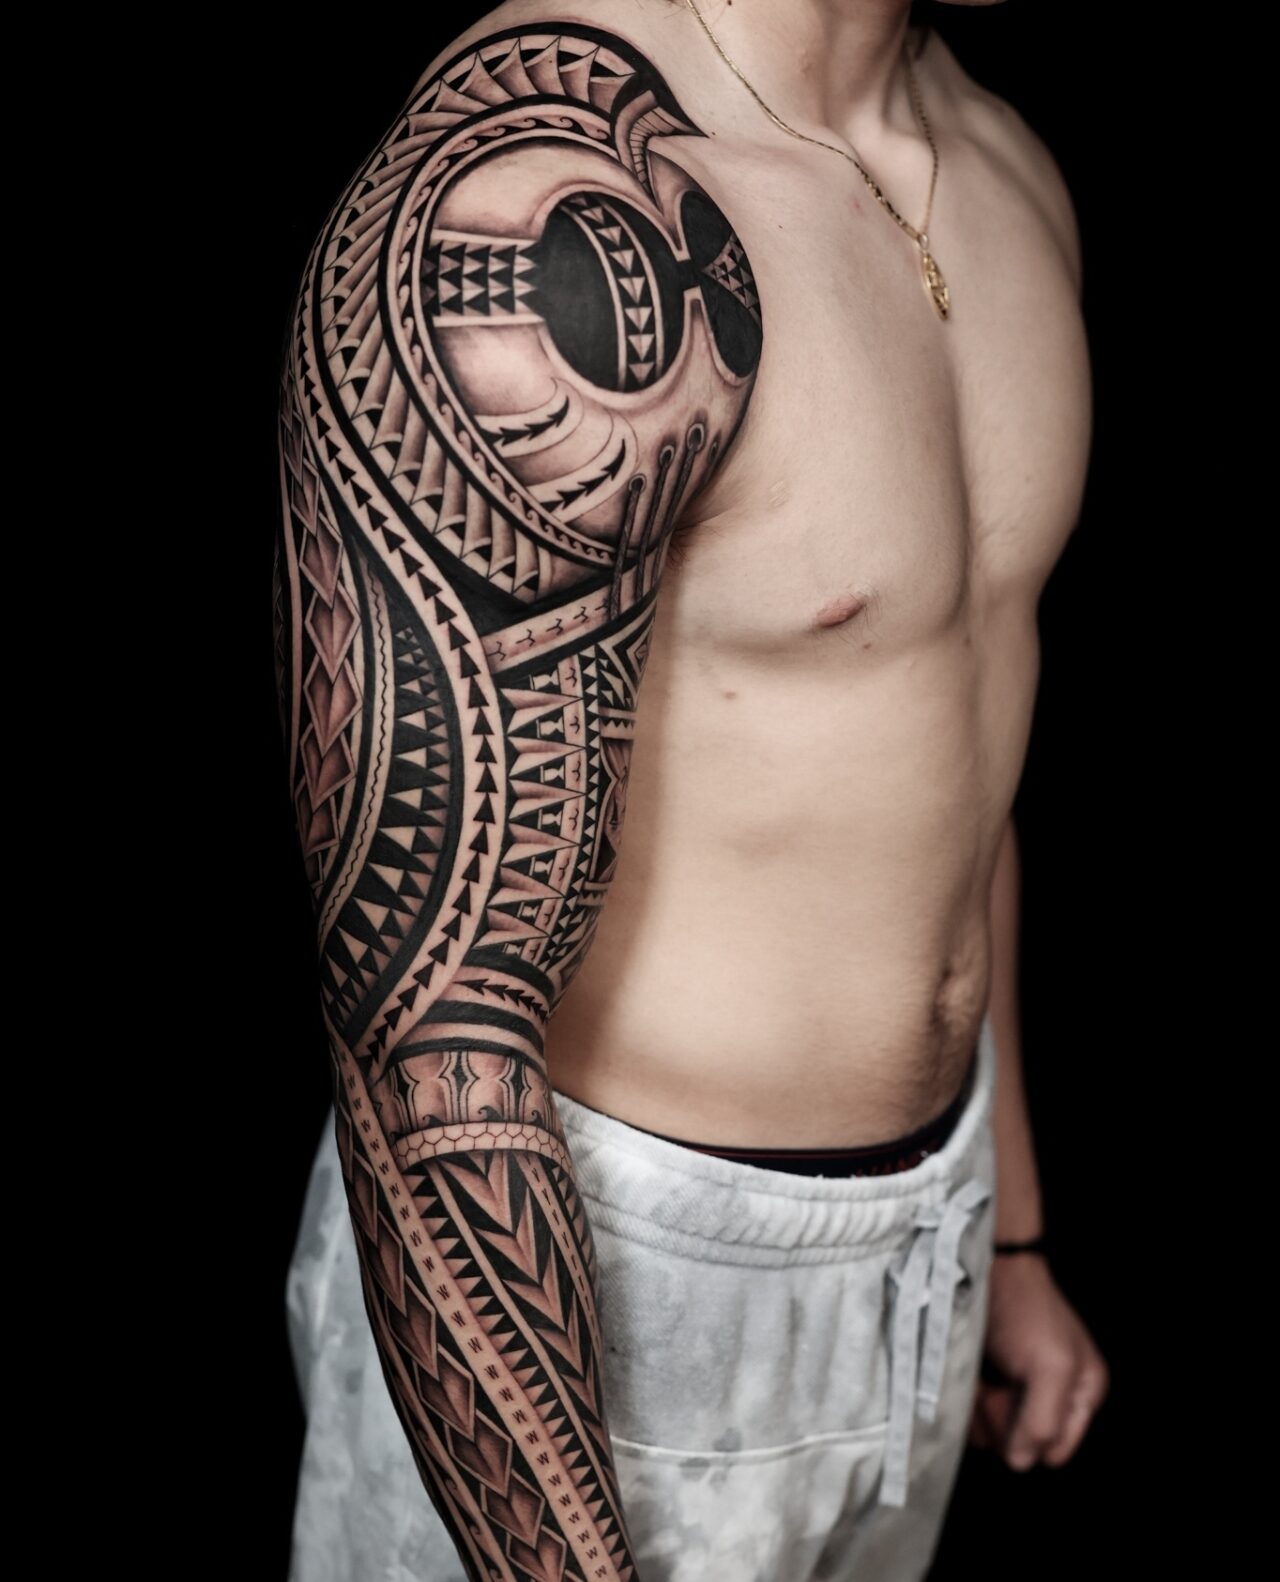 28 Impressive Tribal Tattoo Ideas For Men And Women To Inspire You In 2023